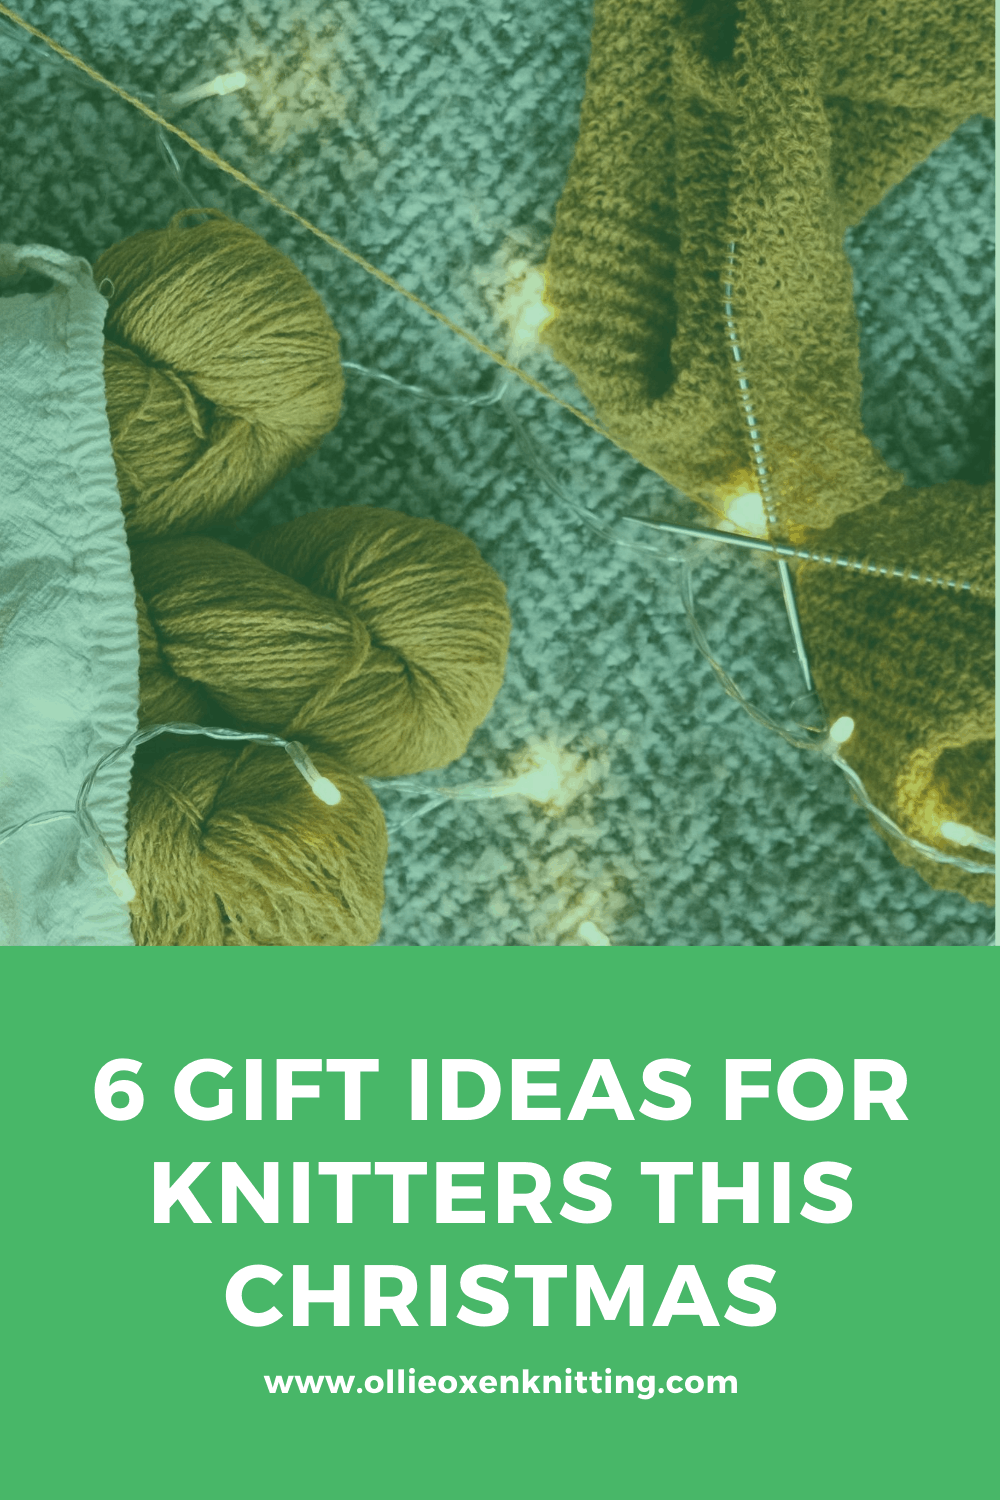 6 Gift Ideas For Knitters This Christmas | Ollie Oxen Knitting